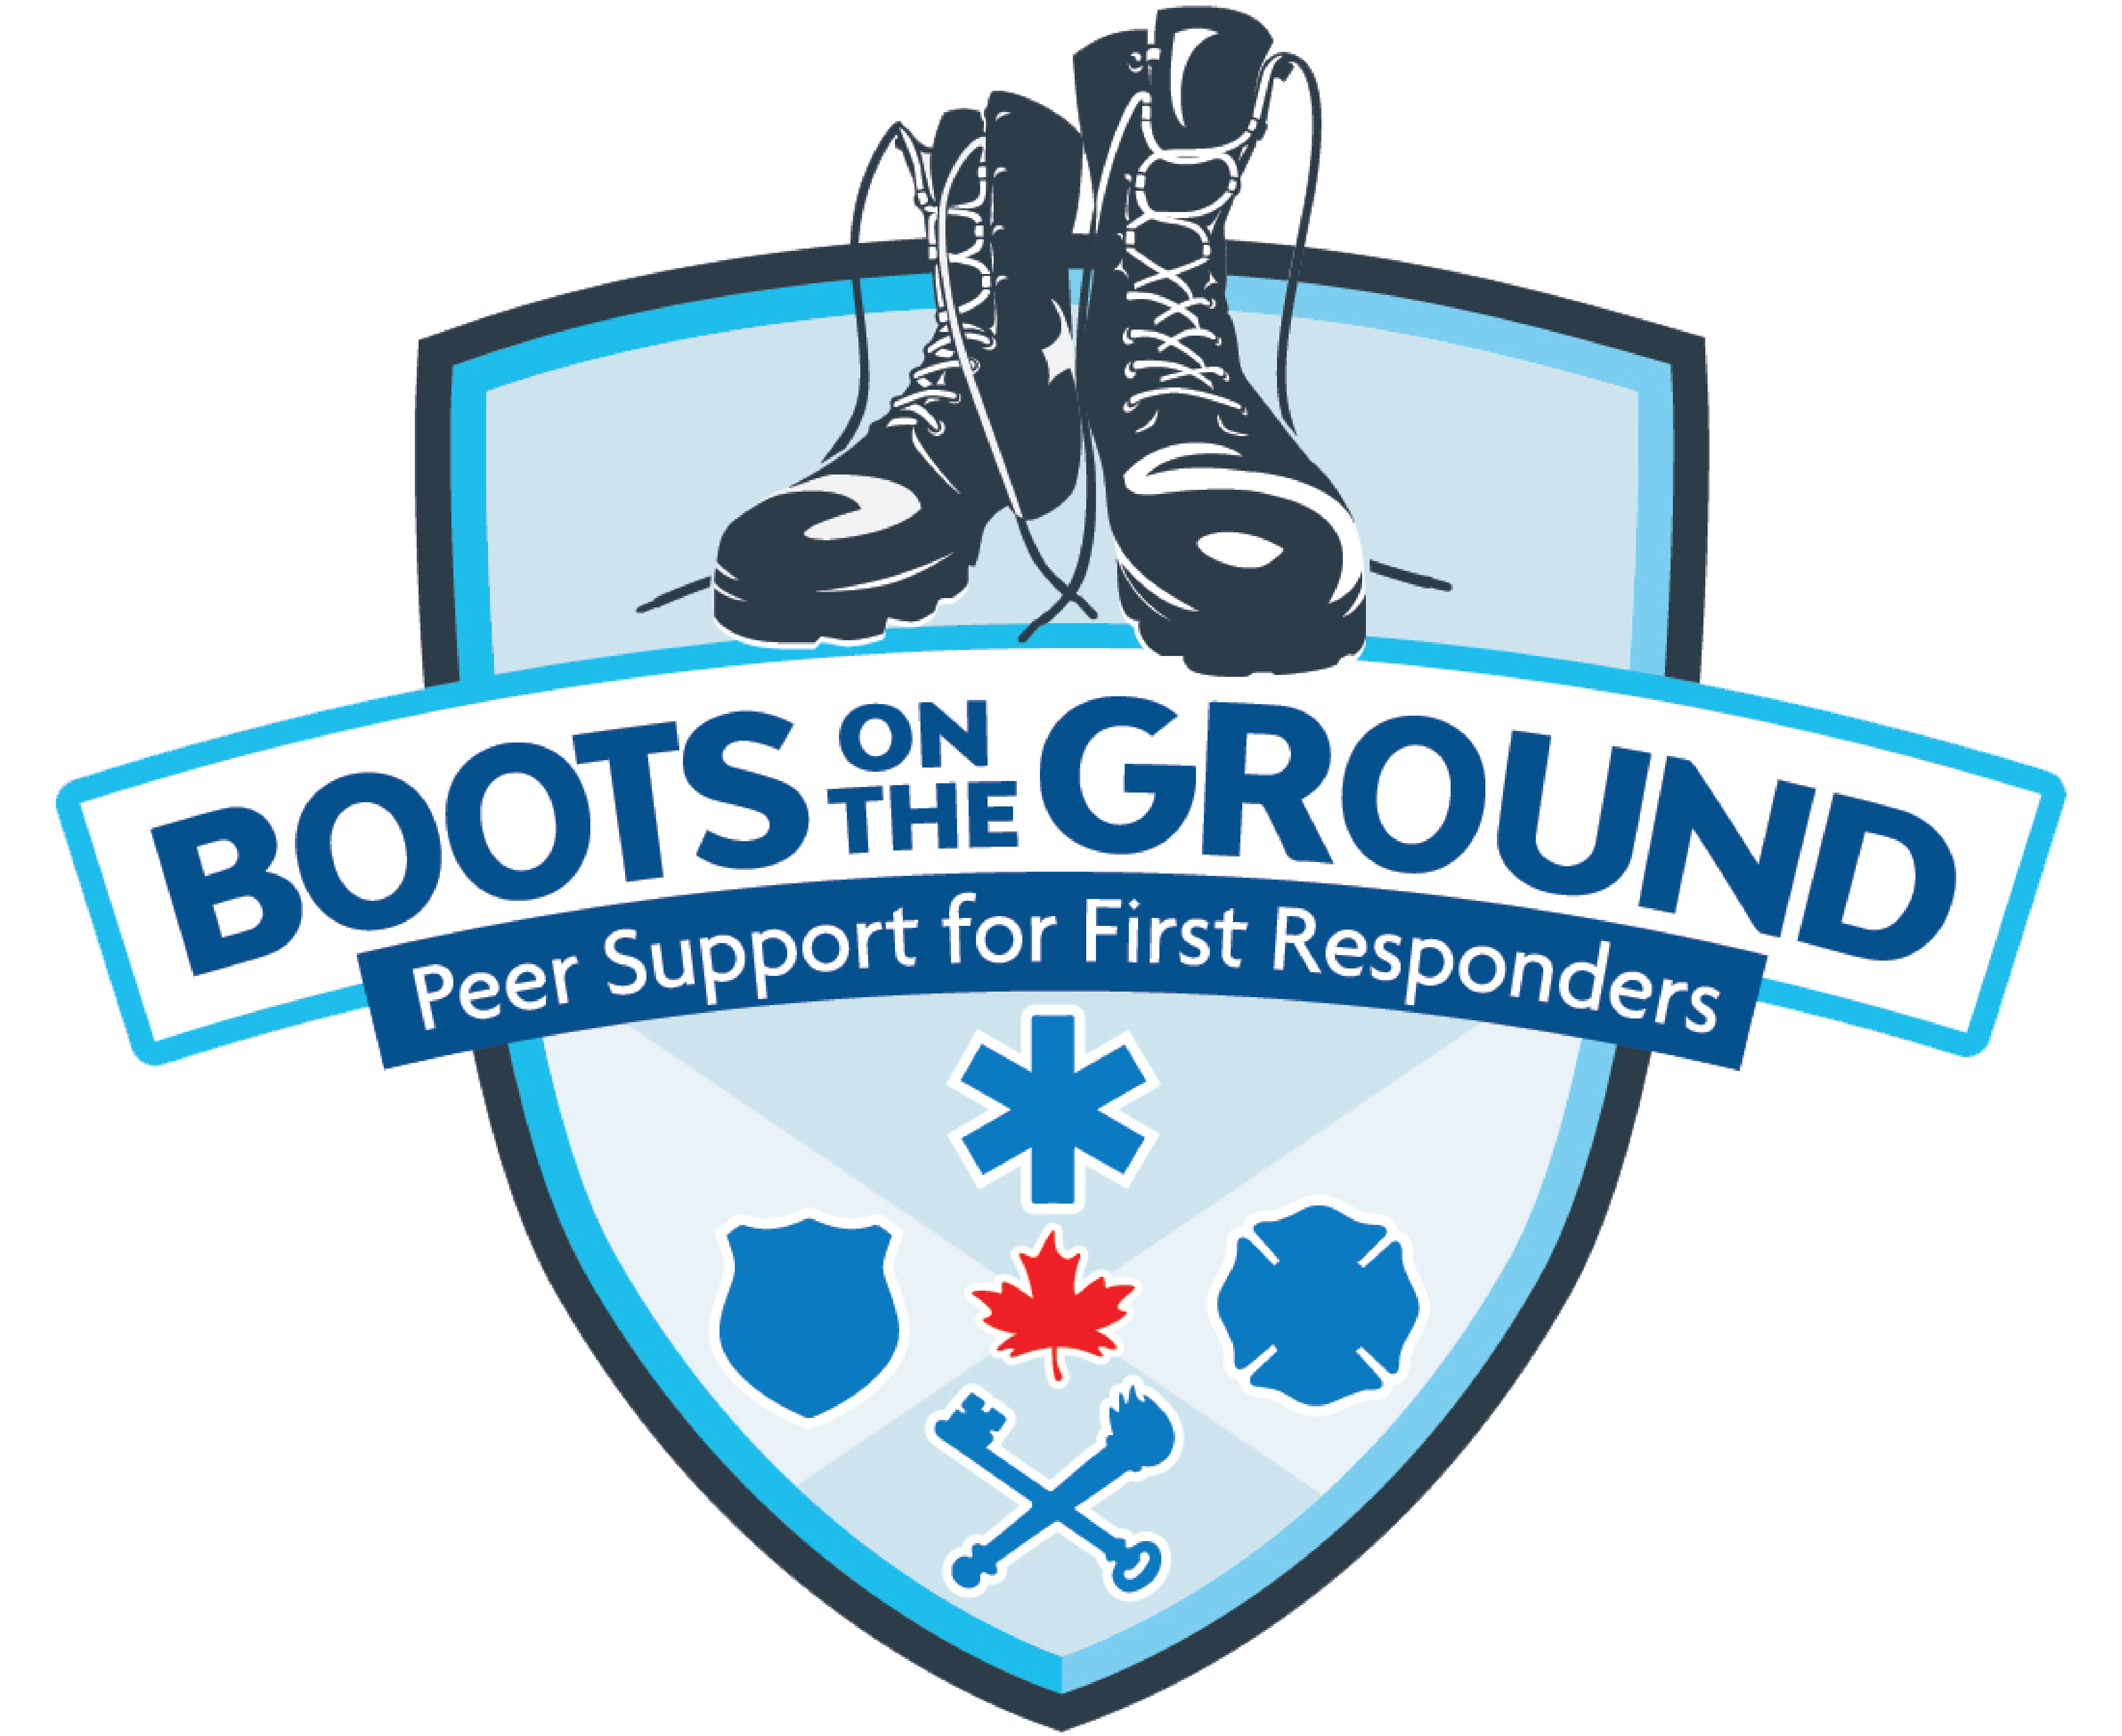 Boots on the Ground logo